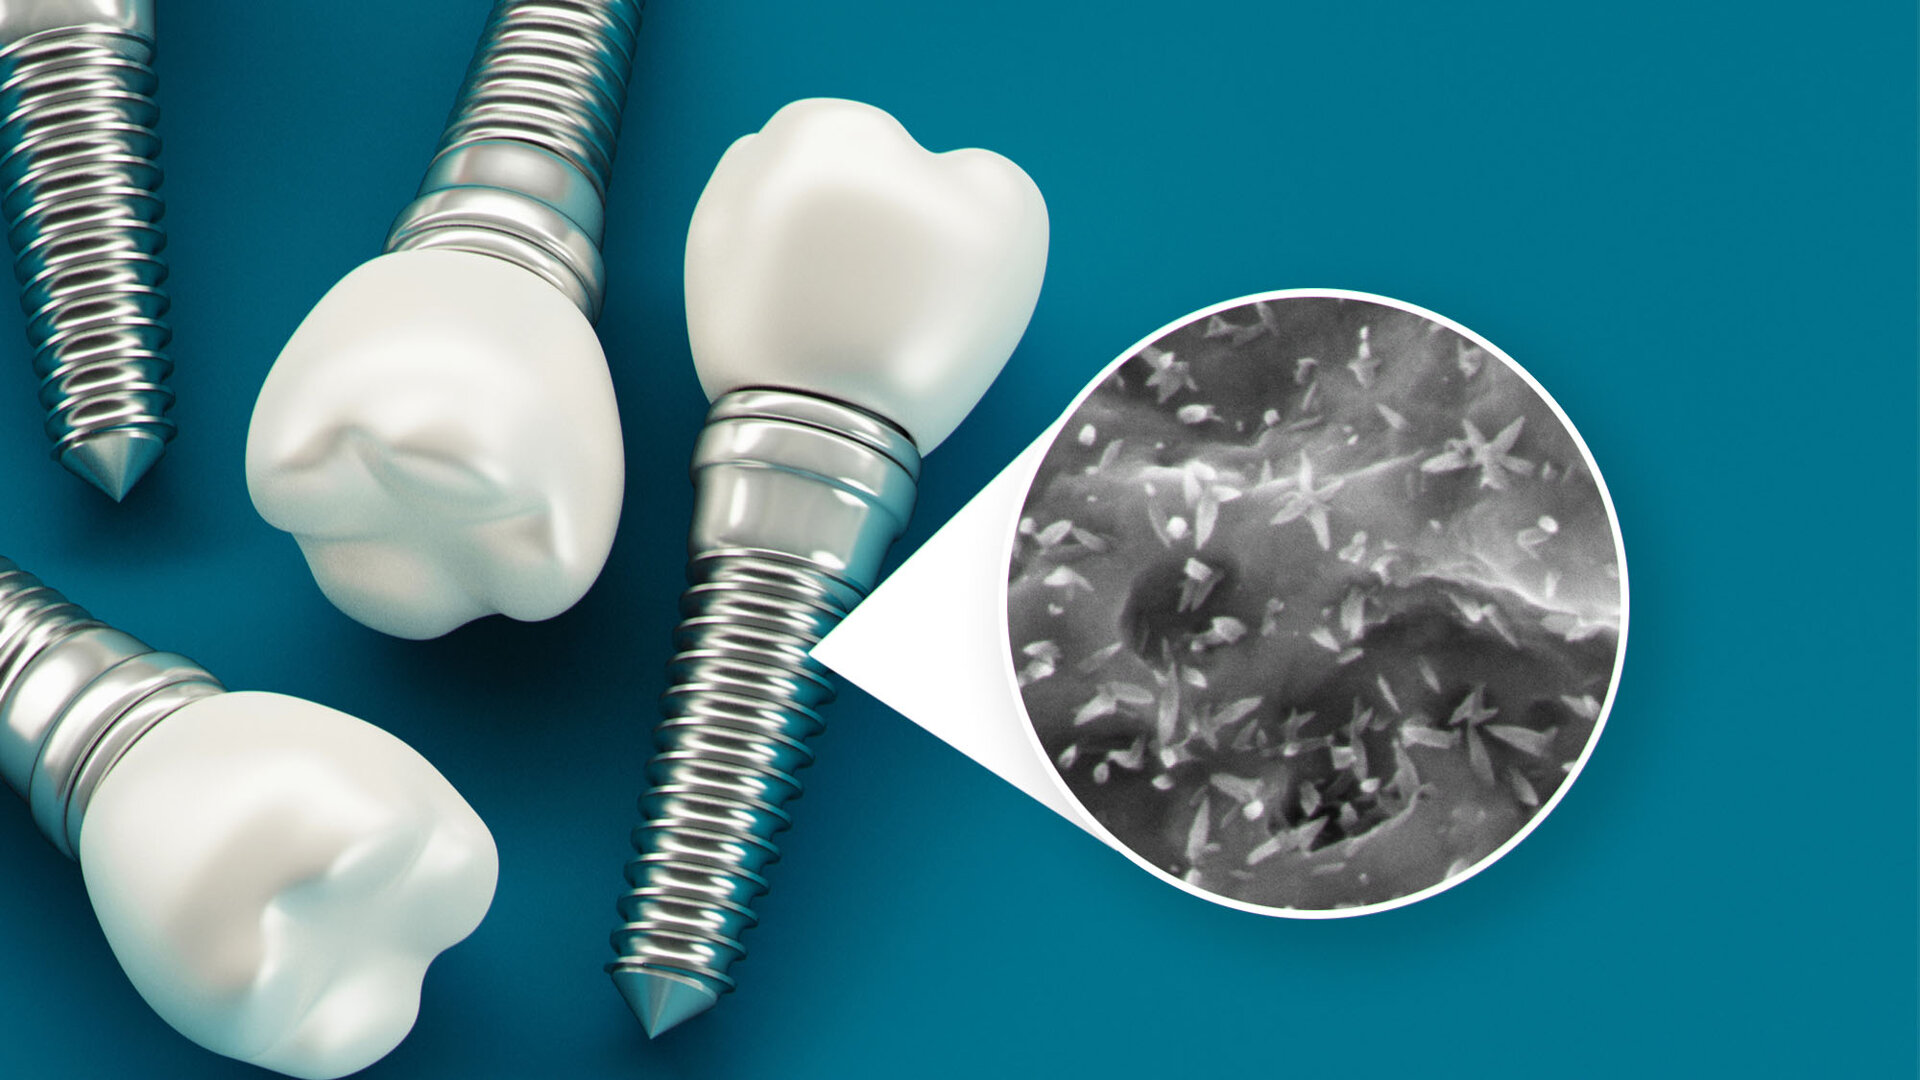 Dentistry at nanoscale: how nanotechnology advances the properties of dental implant surfaces